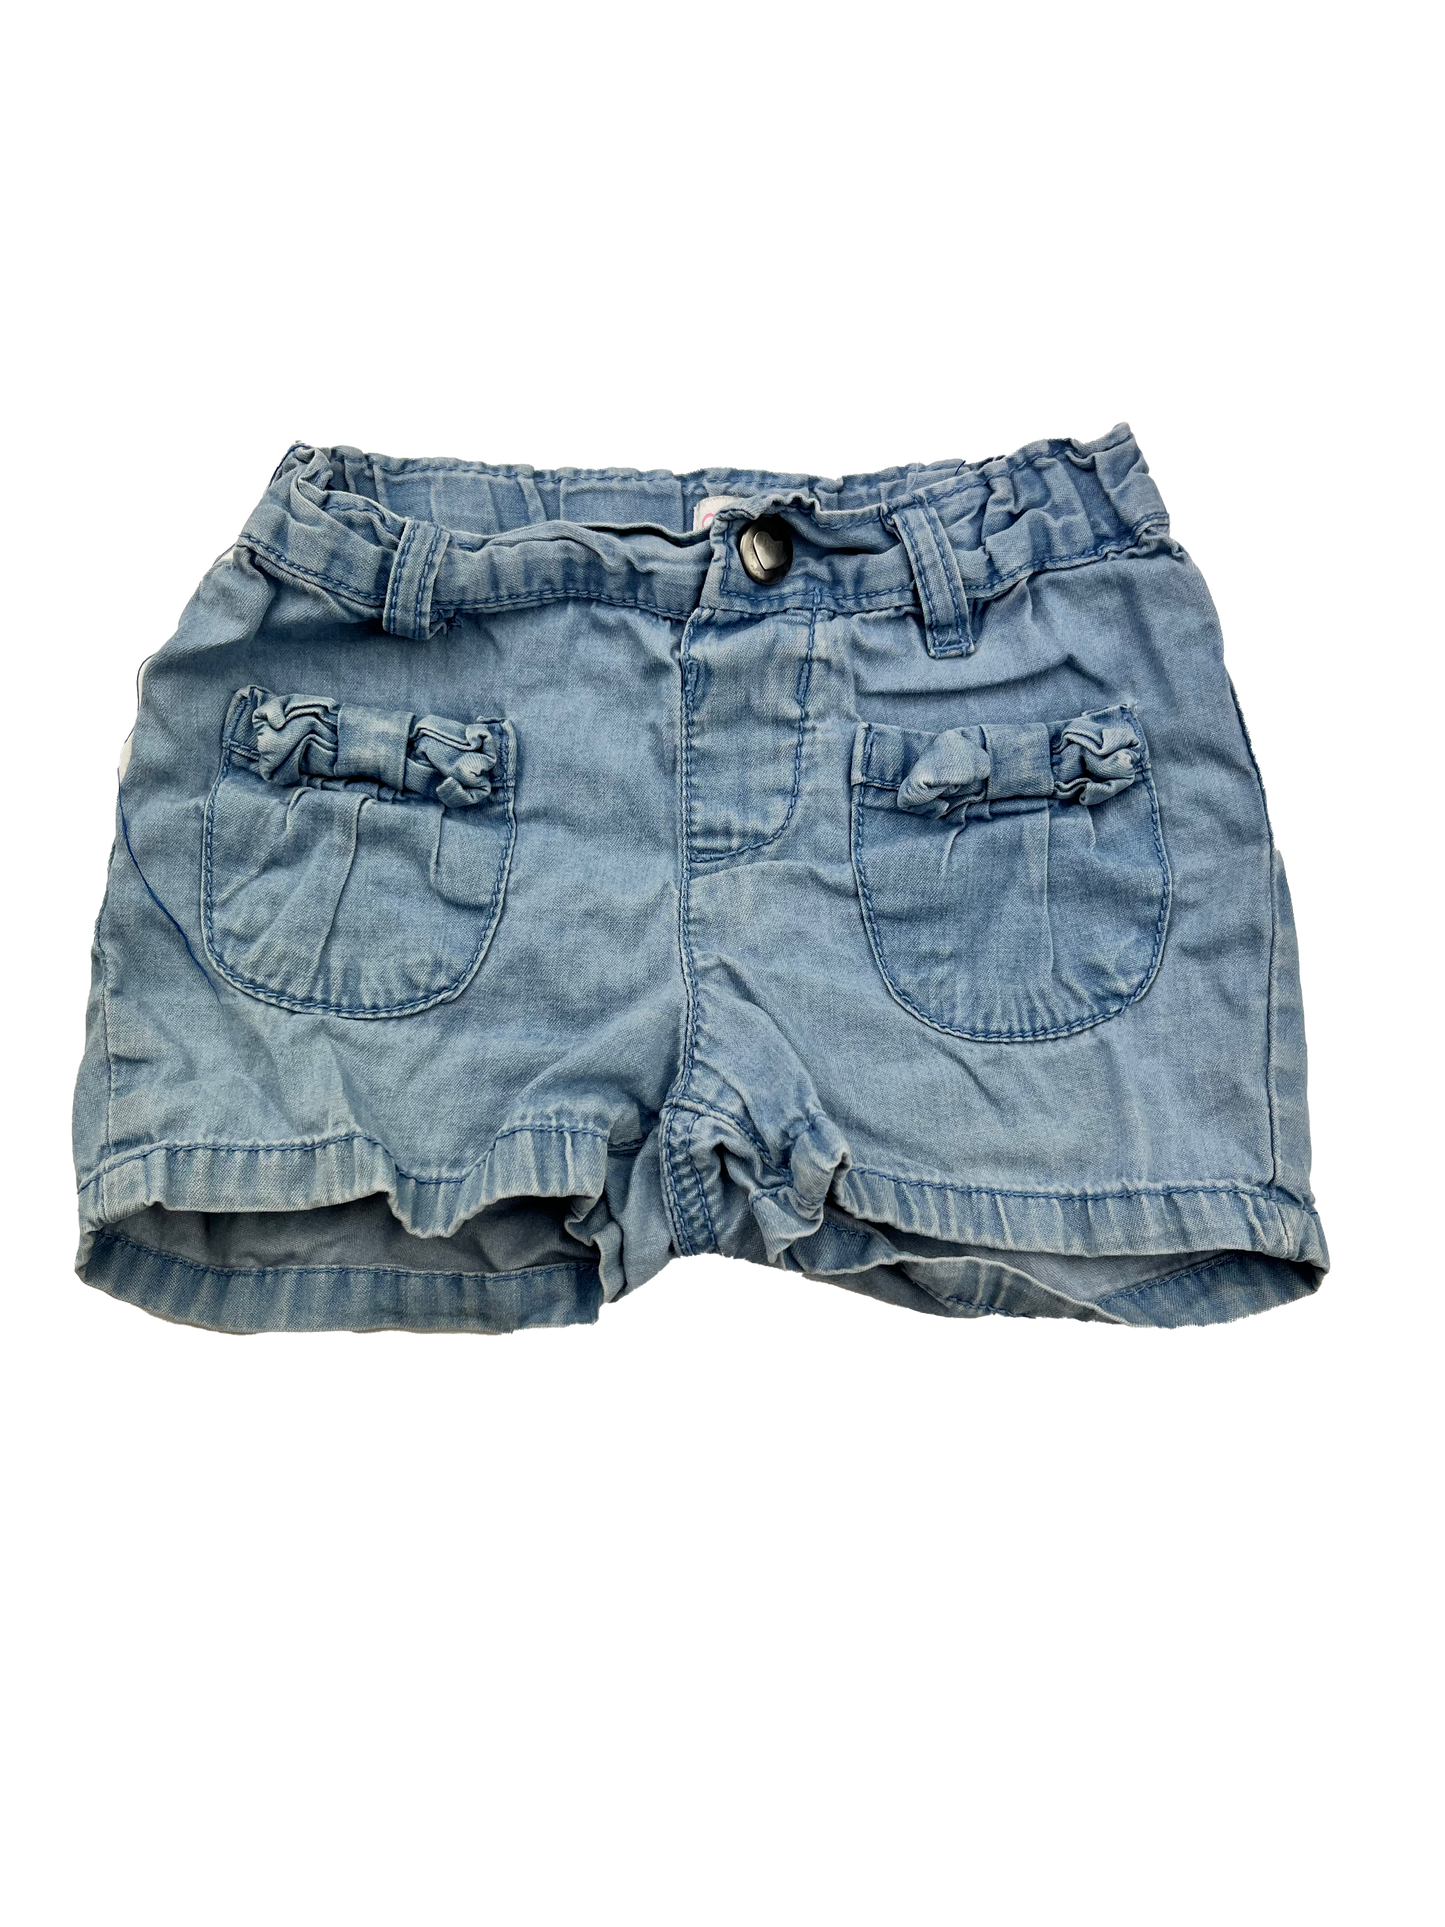 Children's Place Chambray Shorts with Front Pockets 18-24M